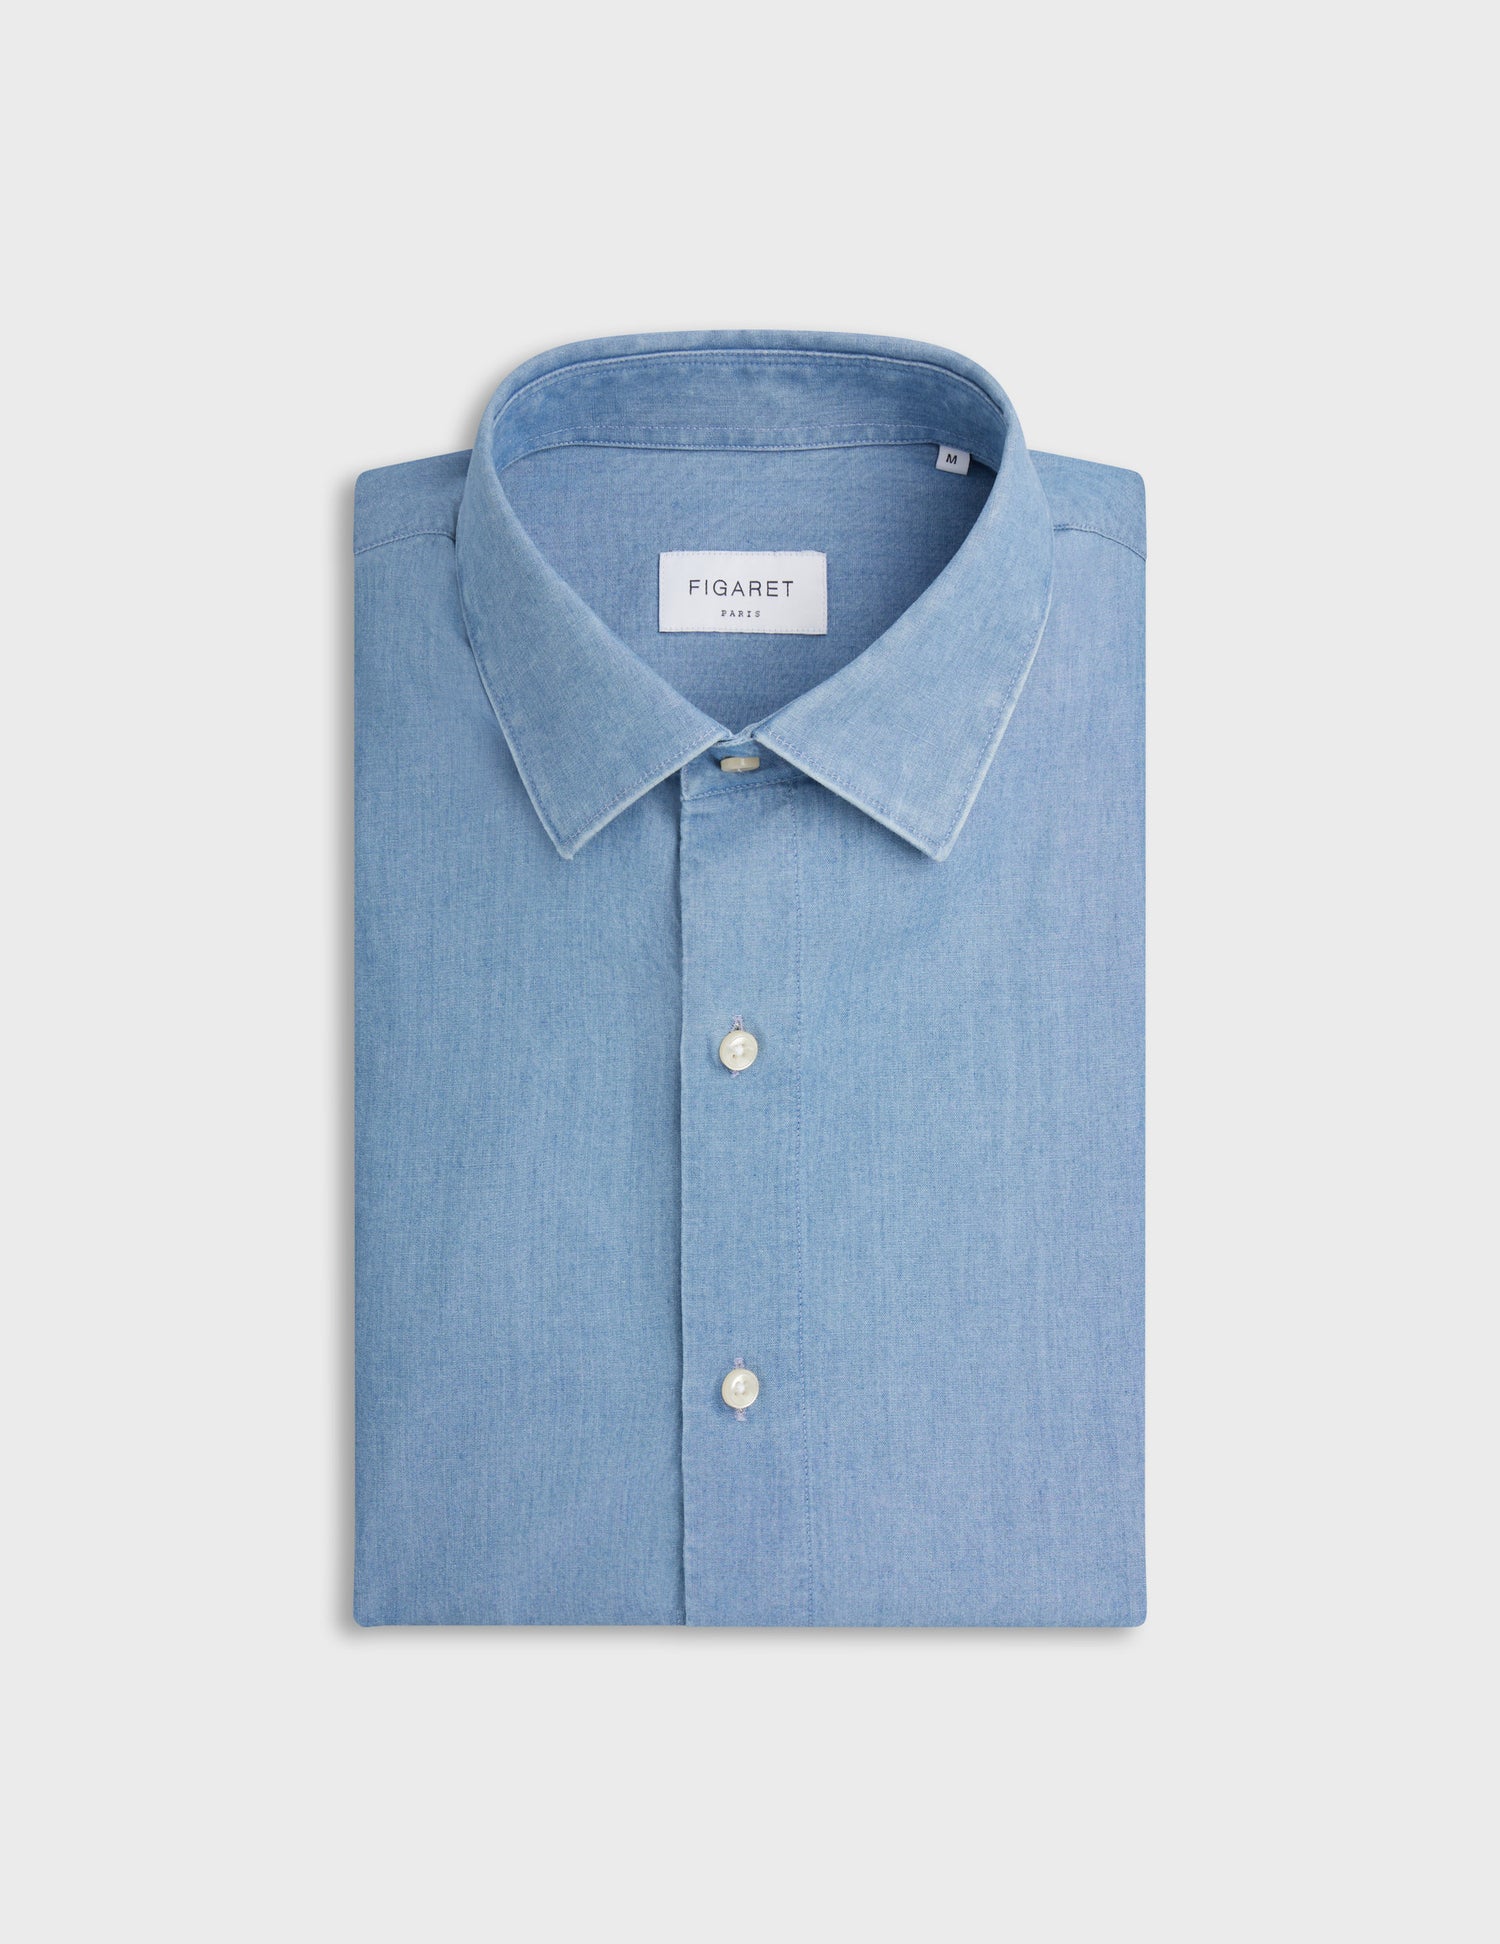 Blue Auguste shirt - Chambray - French Collar#4